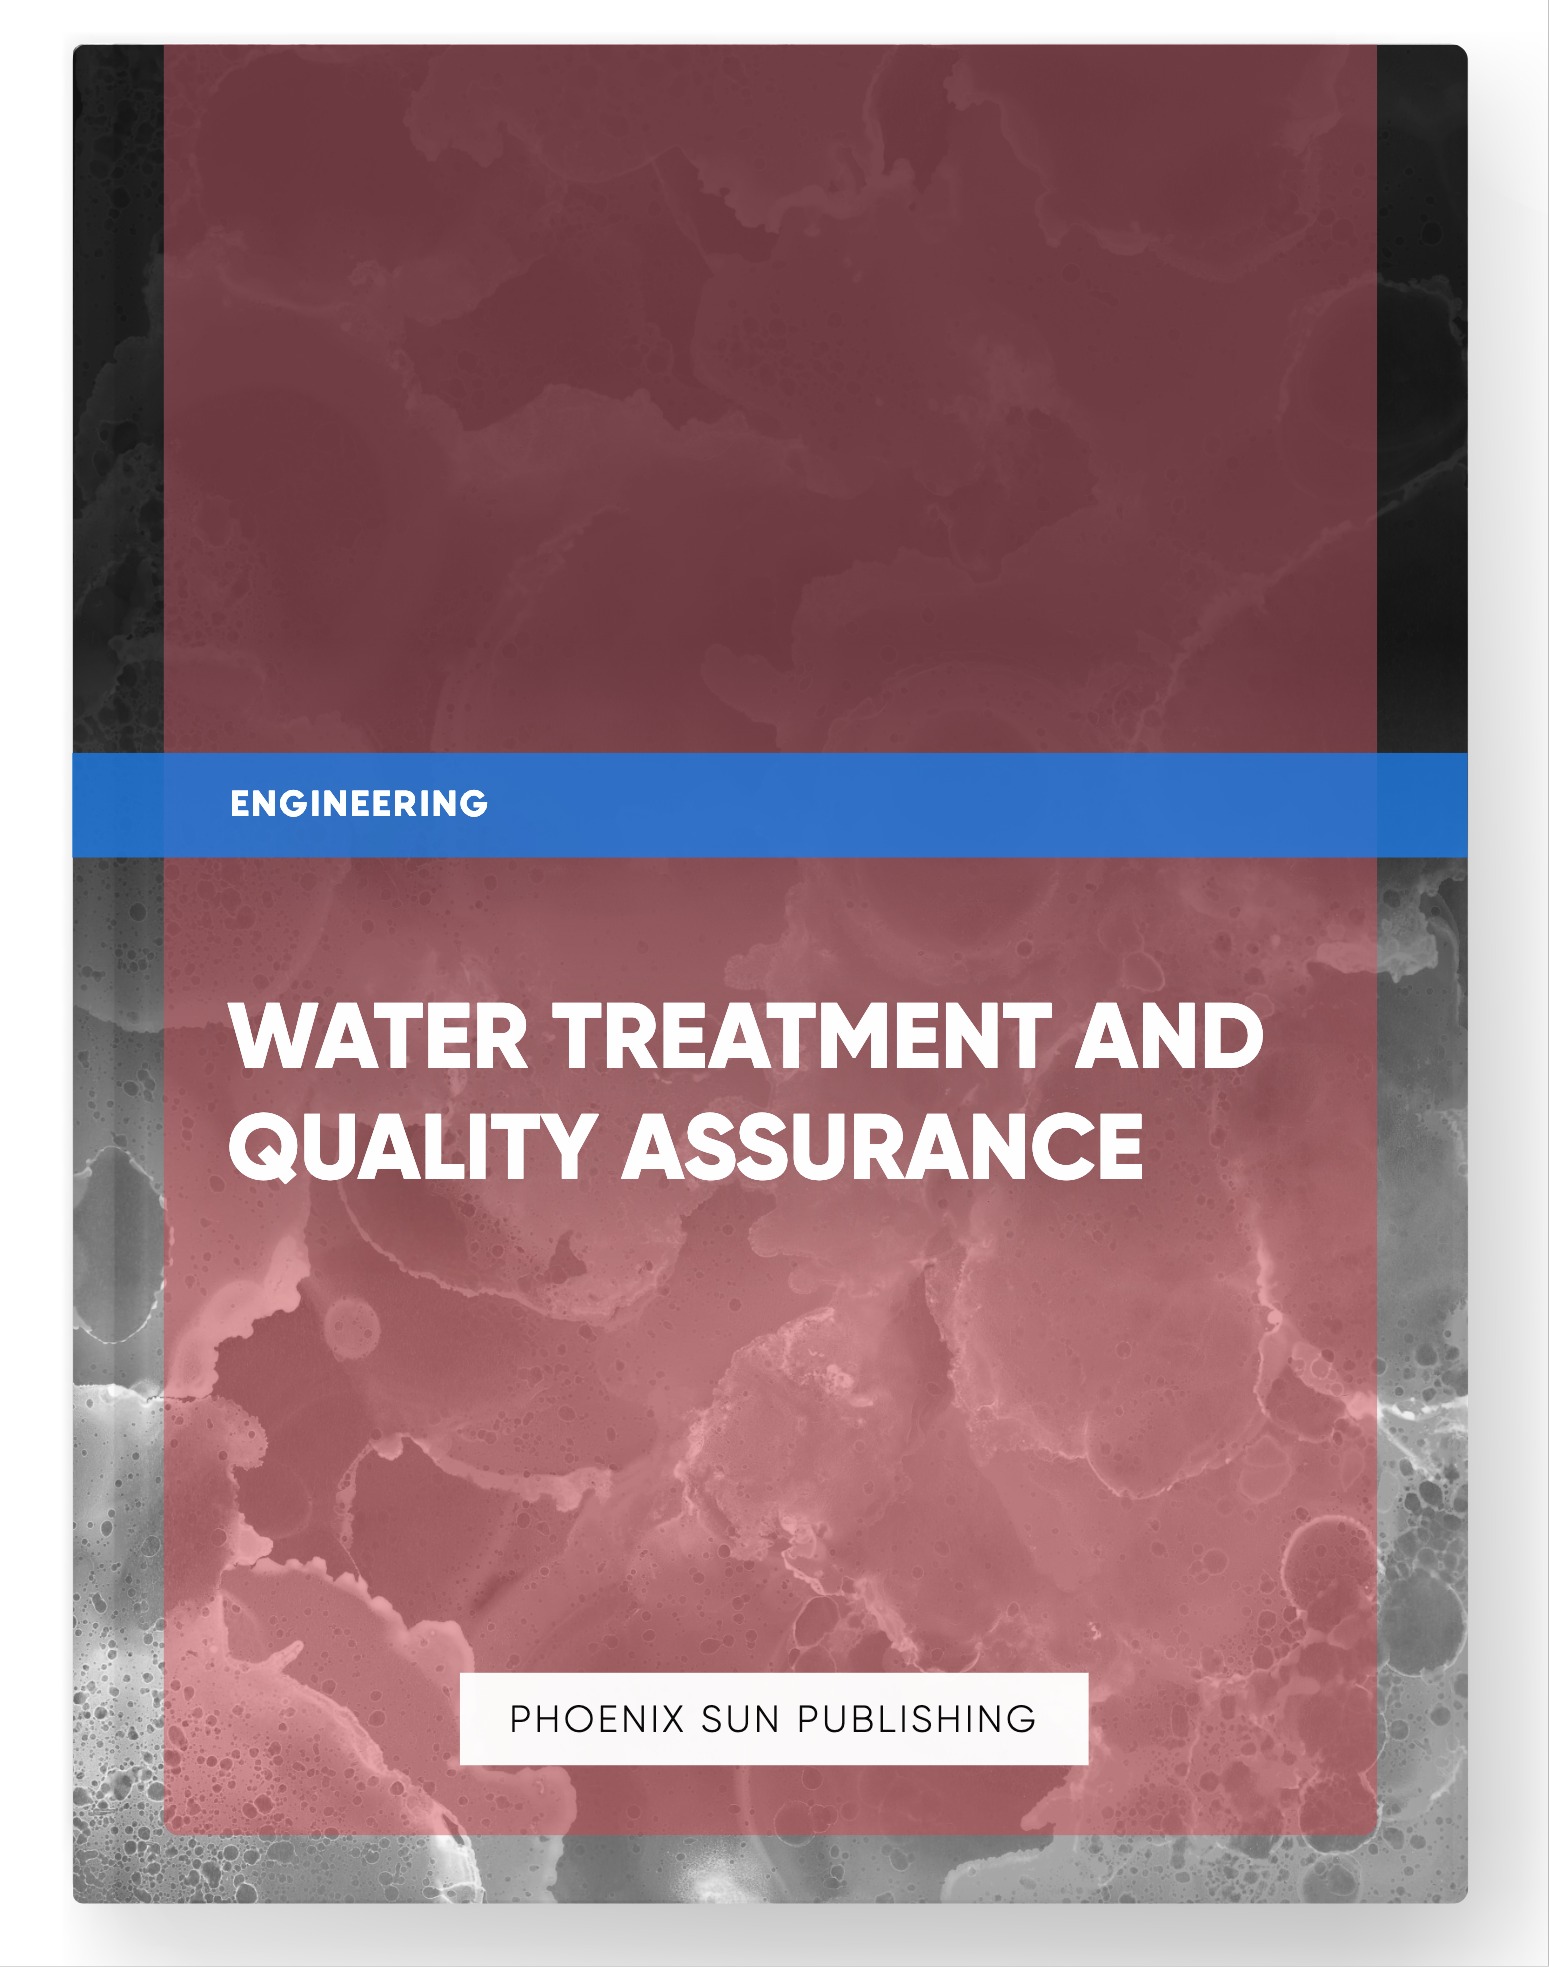 Water Treatment and Quality Assurance